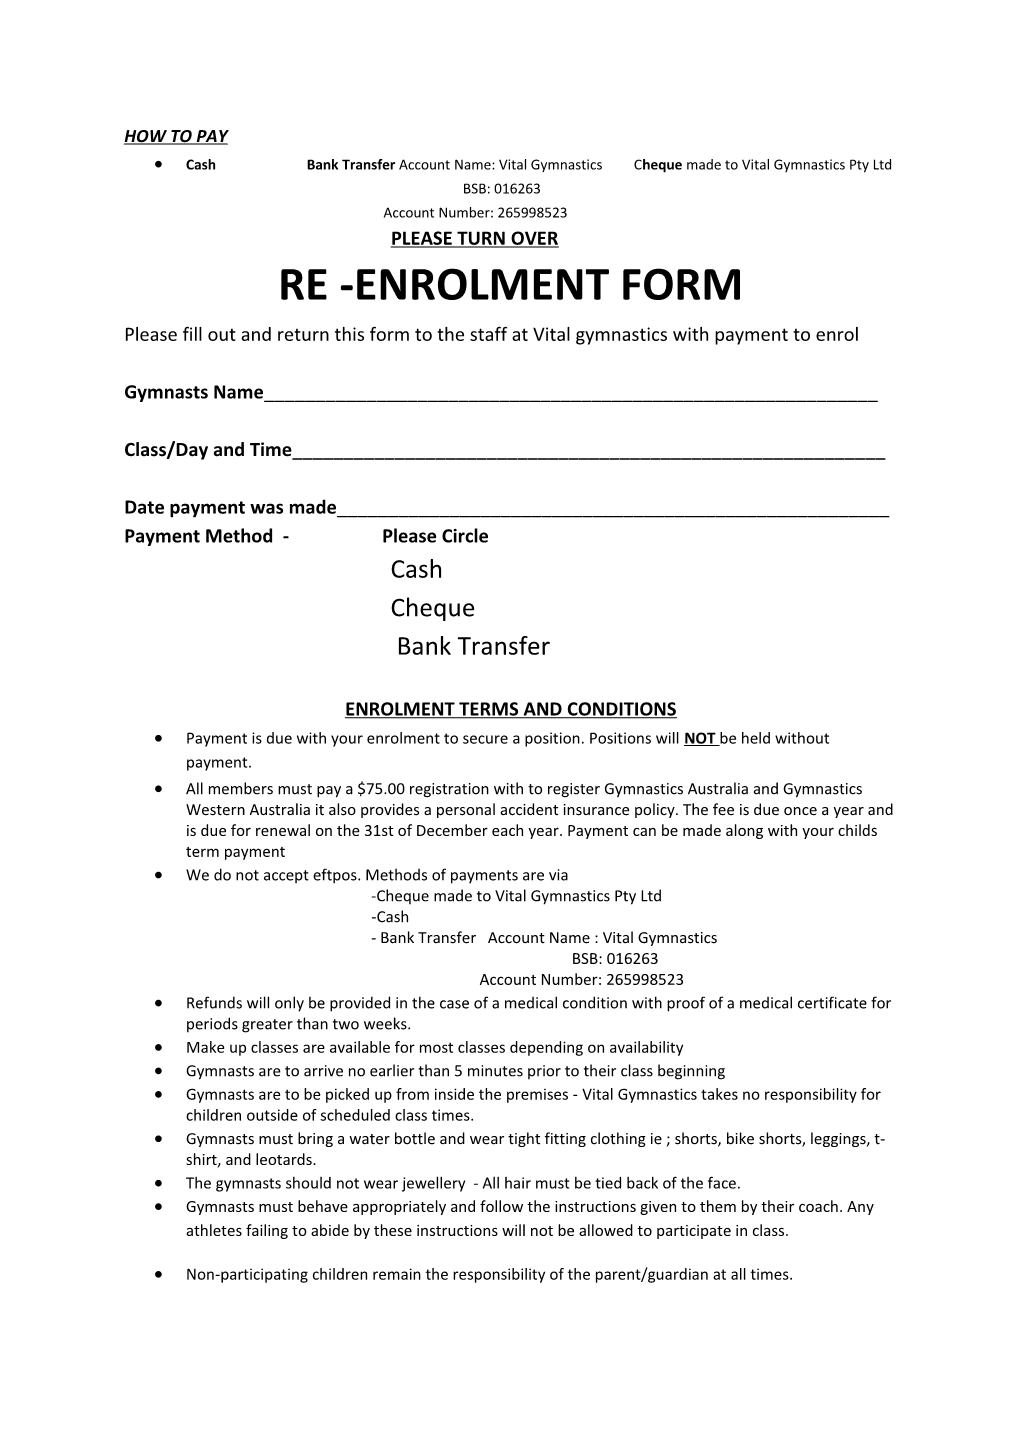 Youmustenrol and Pay to Ensure Your Position. Please Fill out and Return the Enrolment